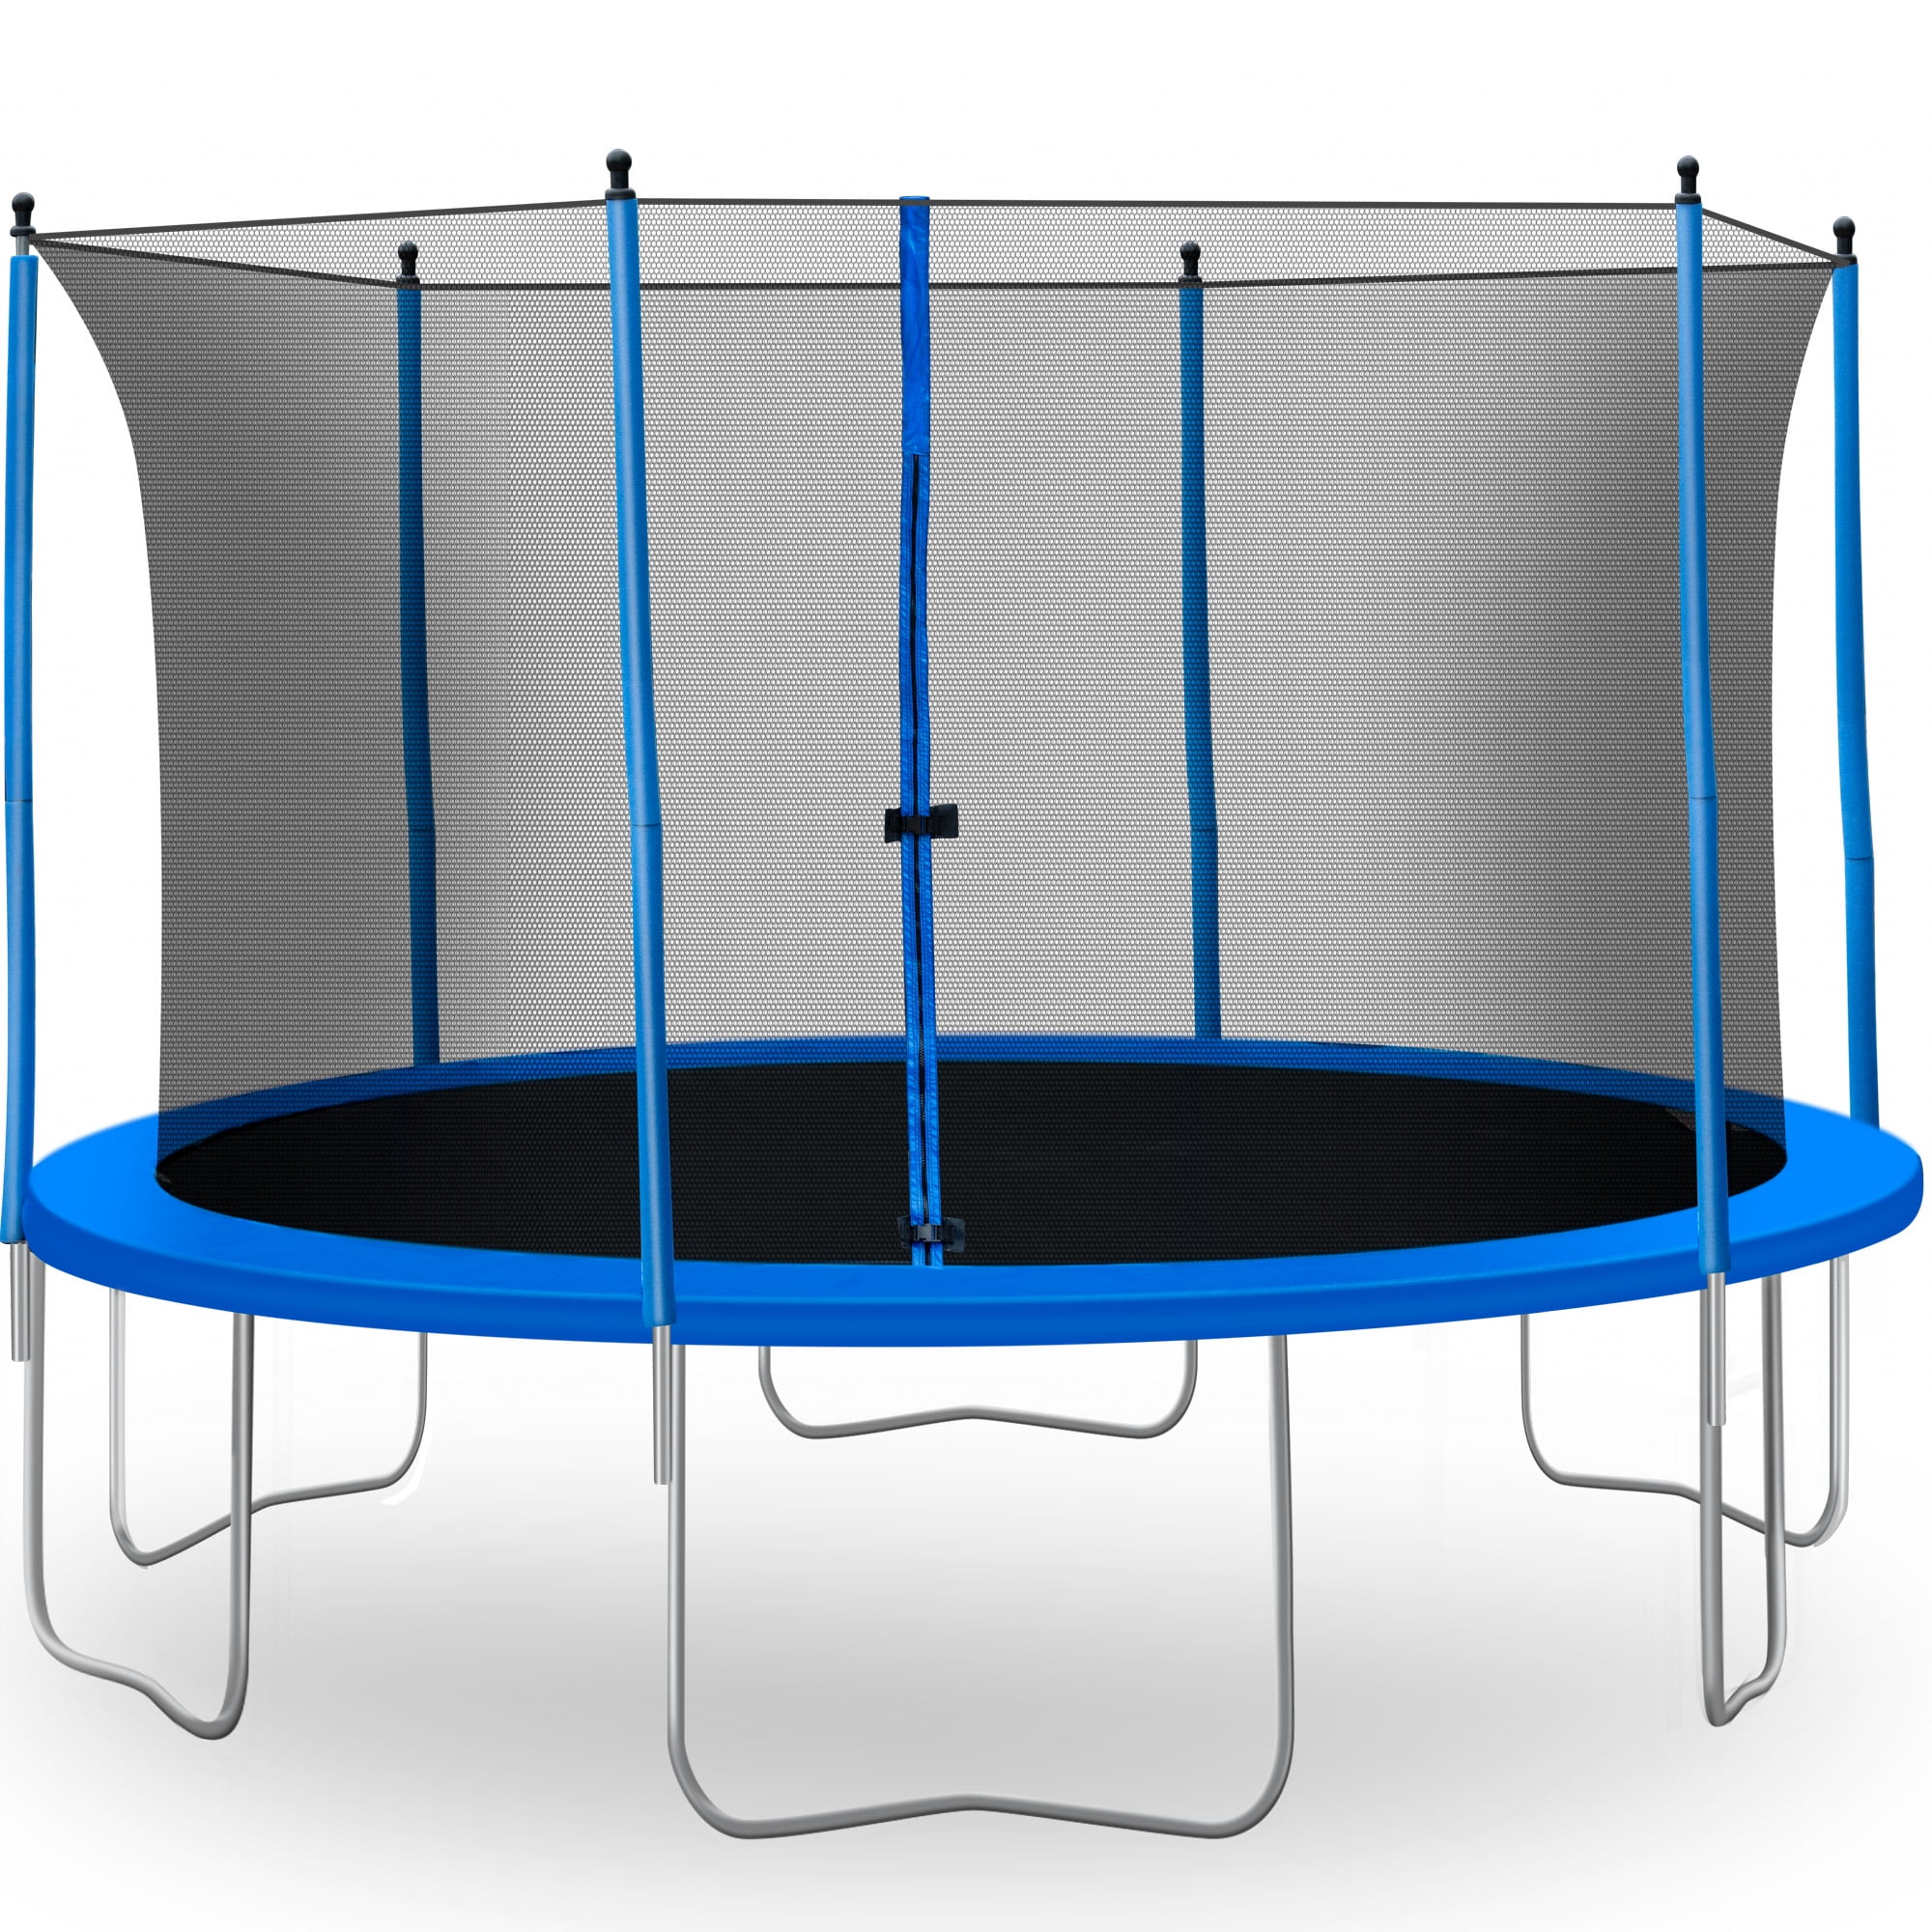 13 FT Outdoor Trampoline for Backyard, Outdoor Trampoline with Safety Enclosure Net, Steel Tube, Circular Trampolines for Adults/Kids, Family Jumping and Ladder, Kids Round Trampoline, Q17173